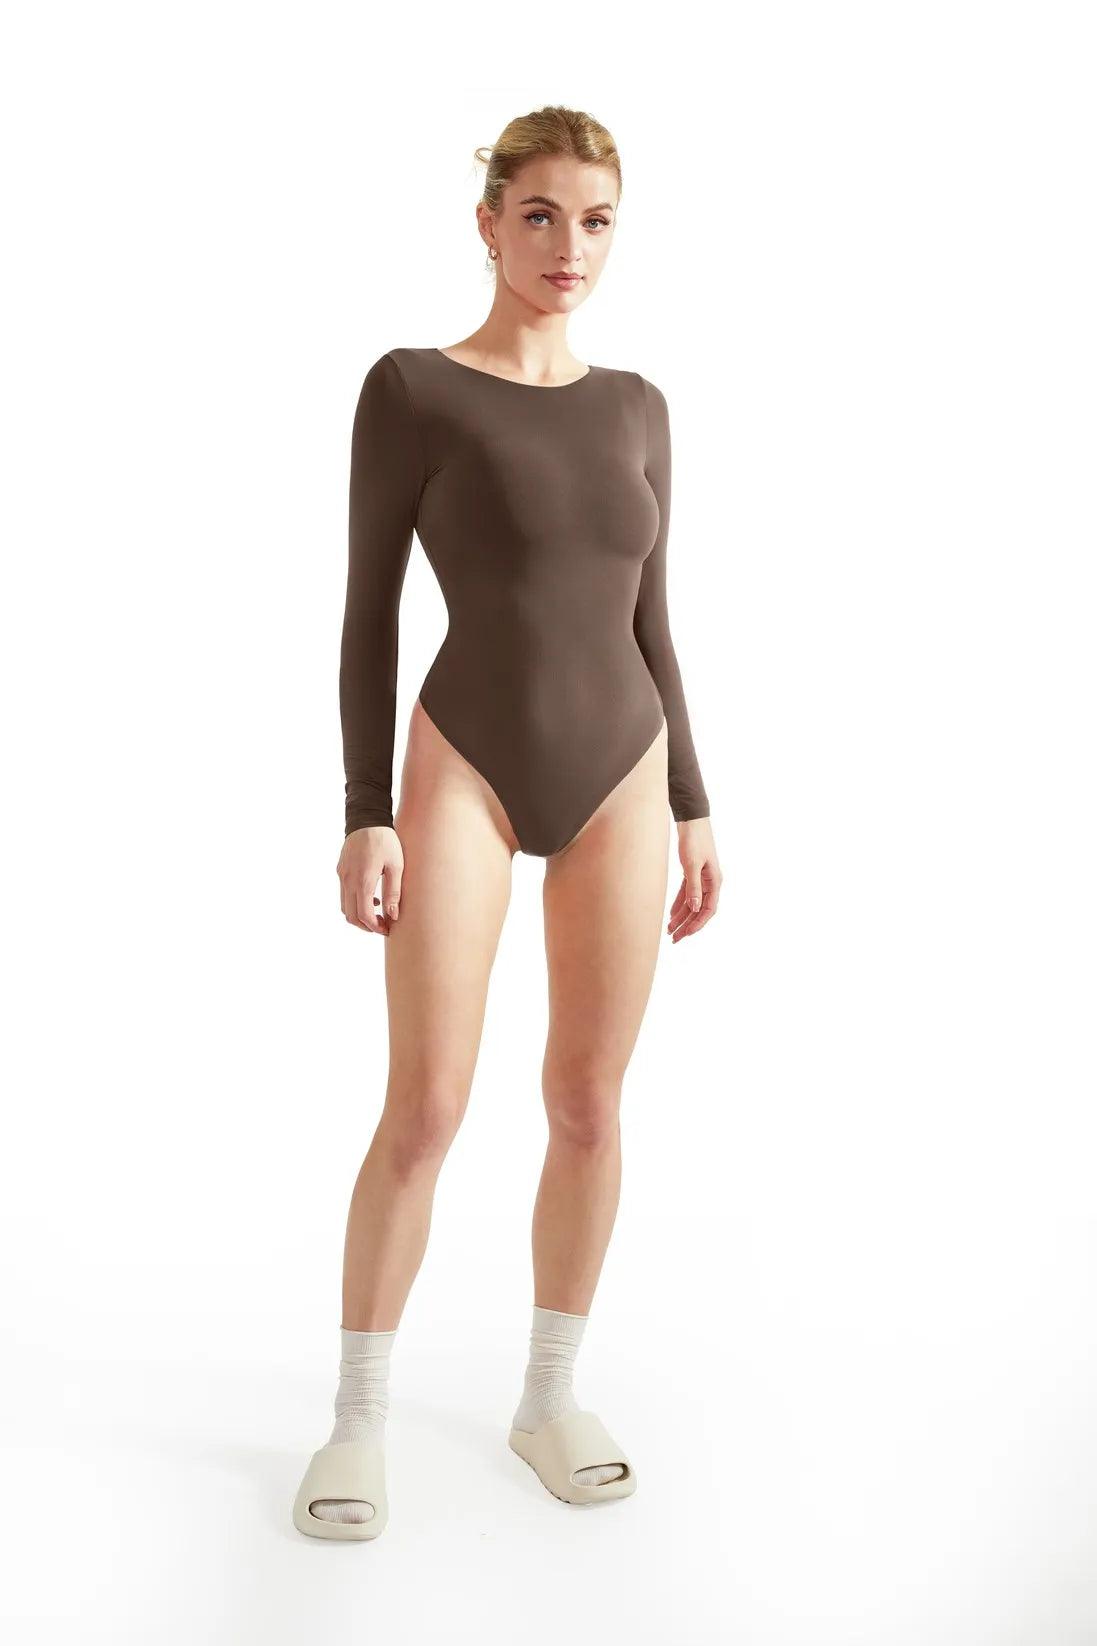 SNDYS Lounge Cyrus Bodysuit Taupe Beige Natural Long Sleeve Revolve XS NWT  $55